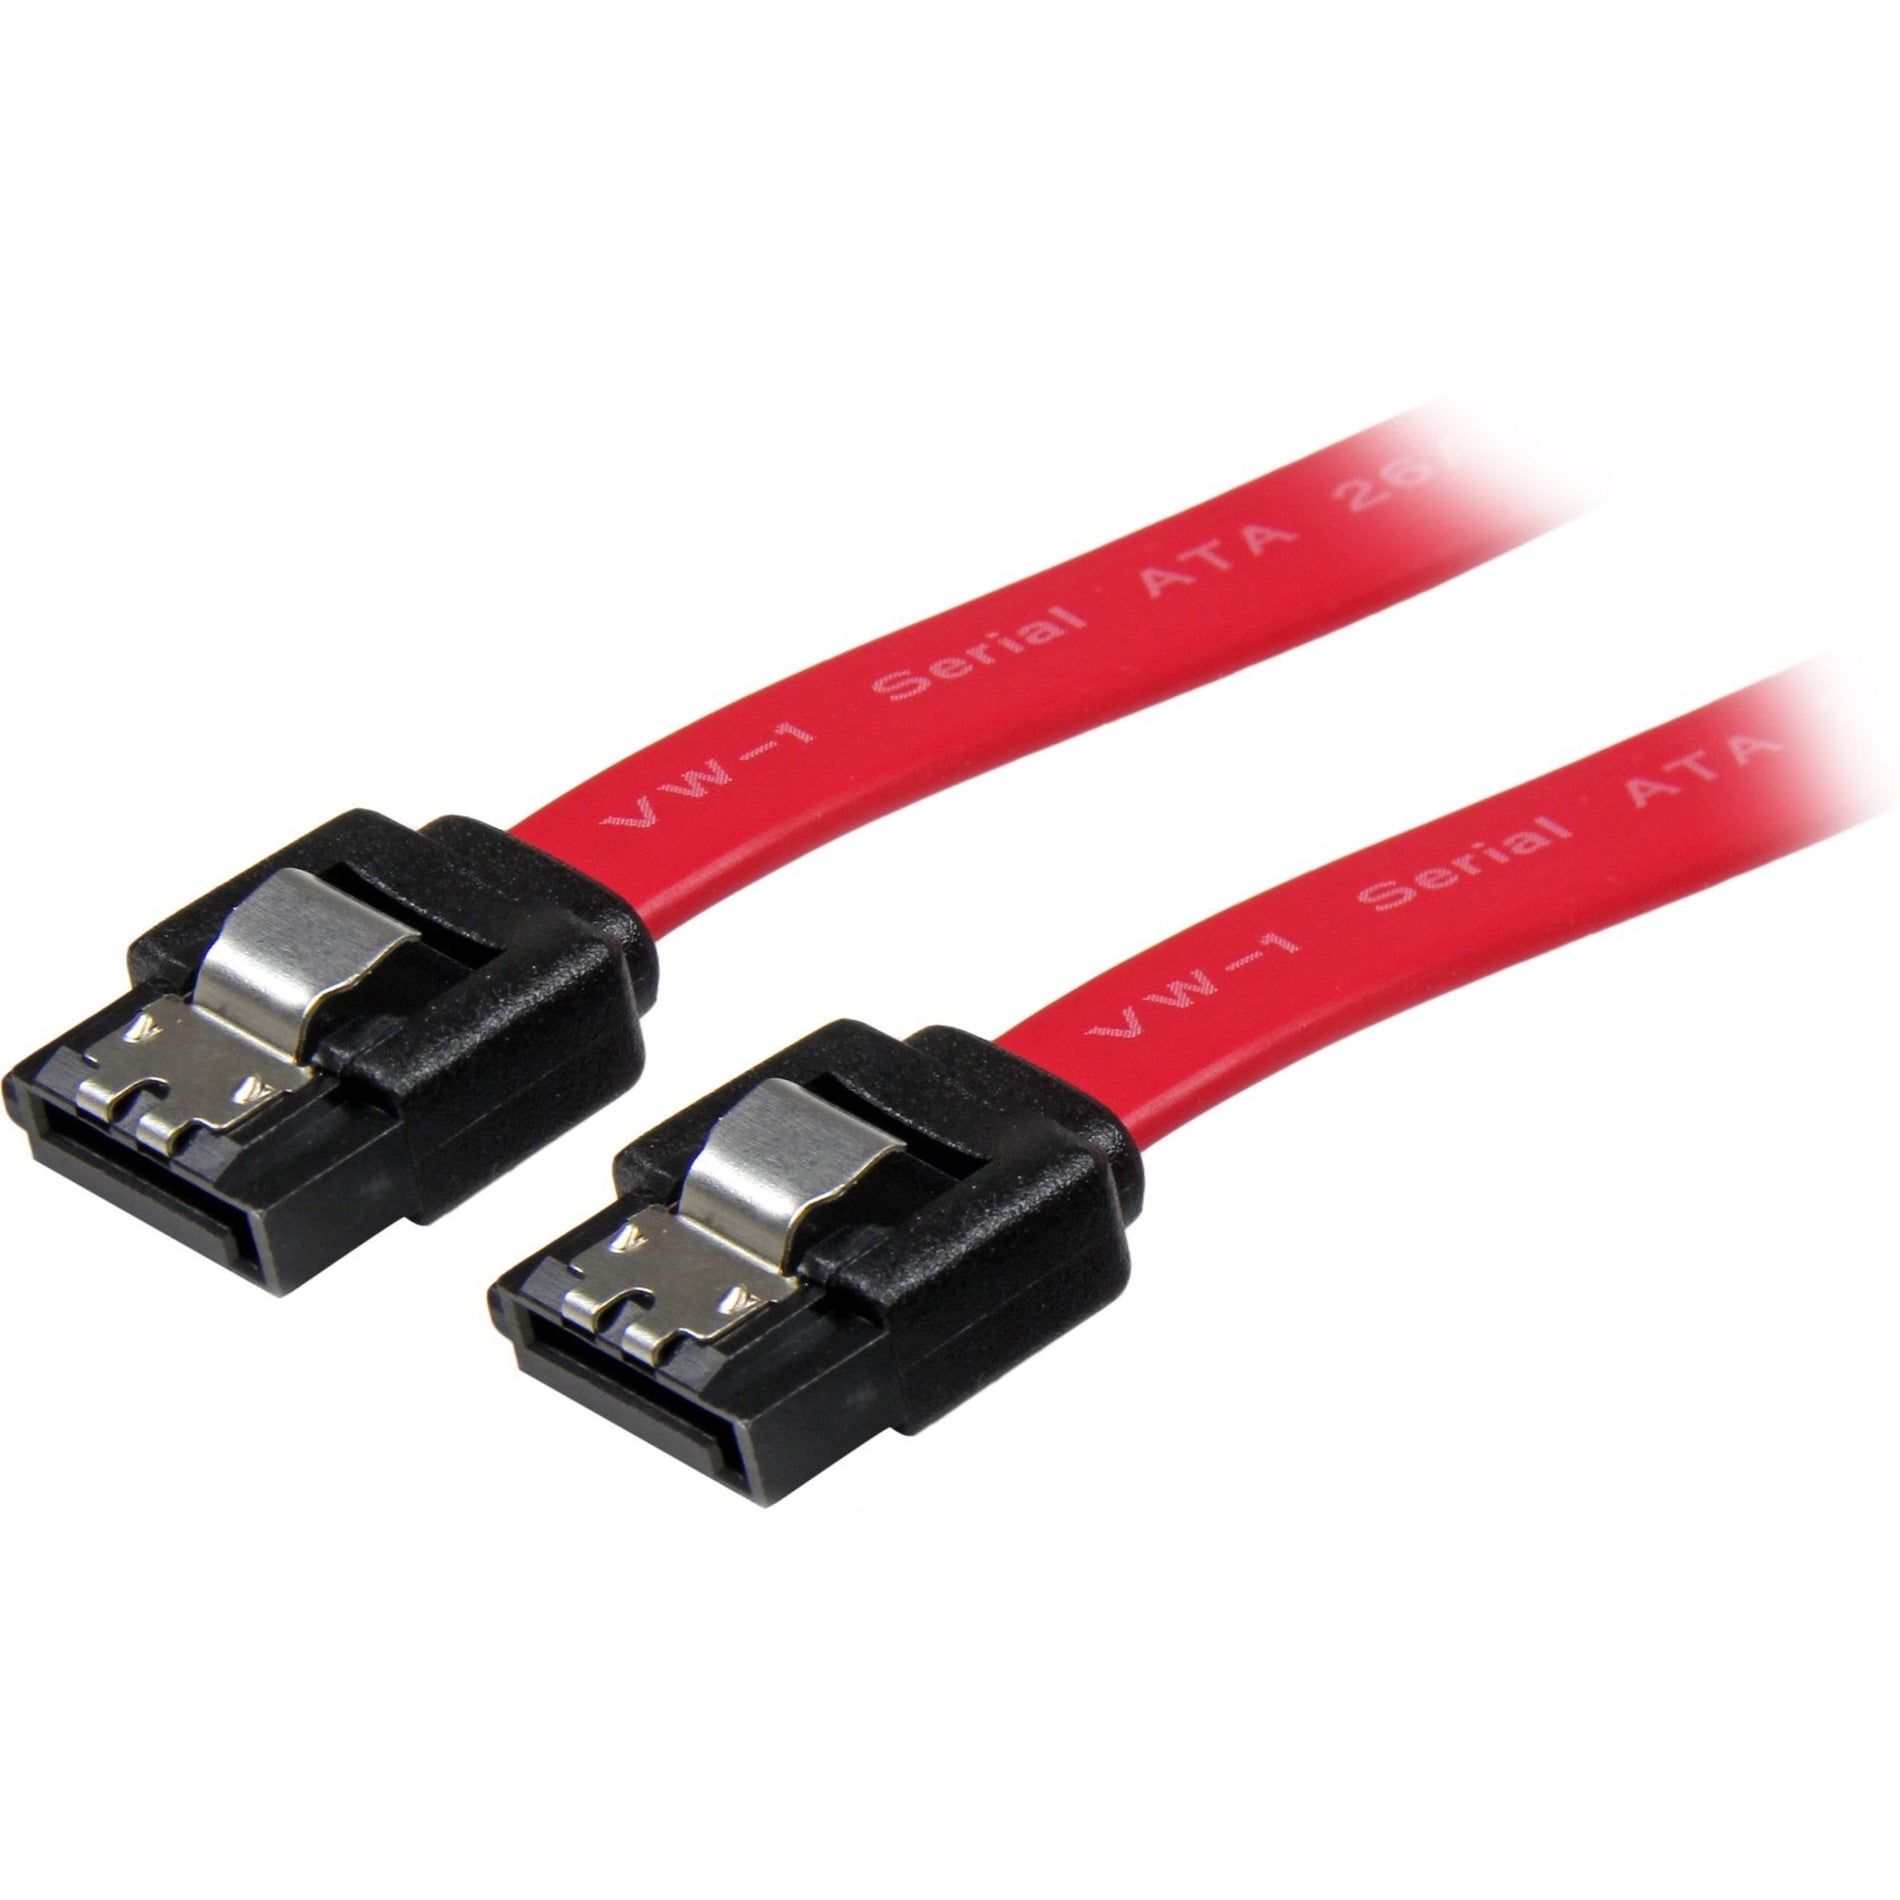 StarTech.com LSATA8 8in Latching SATA Cable, Flexible, 6 Gbit/s Data Transfer Rate